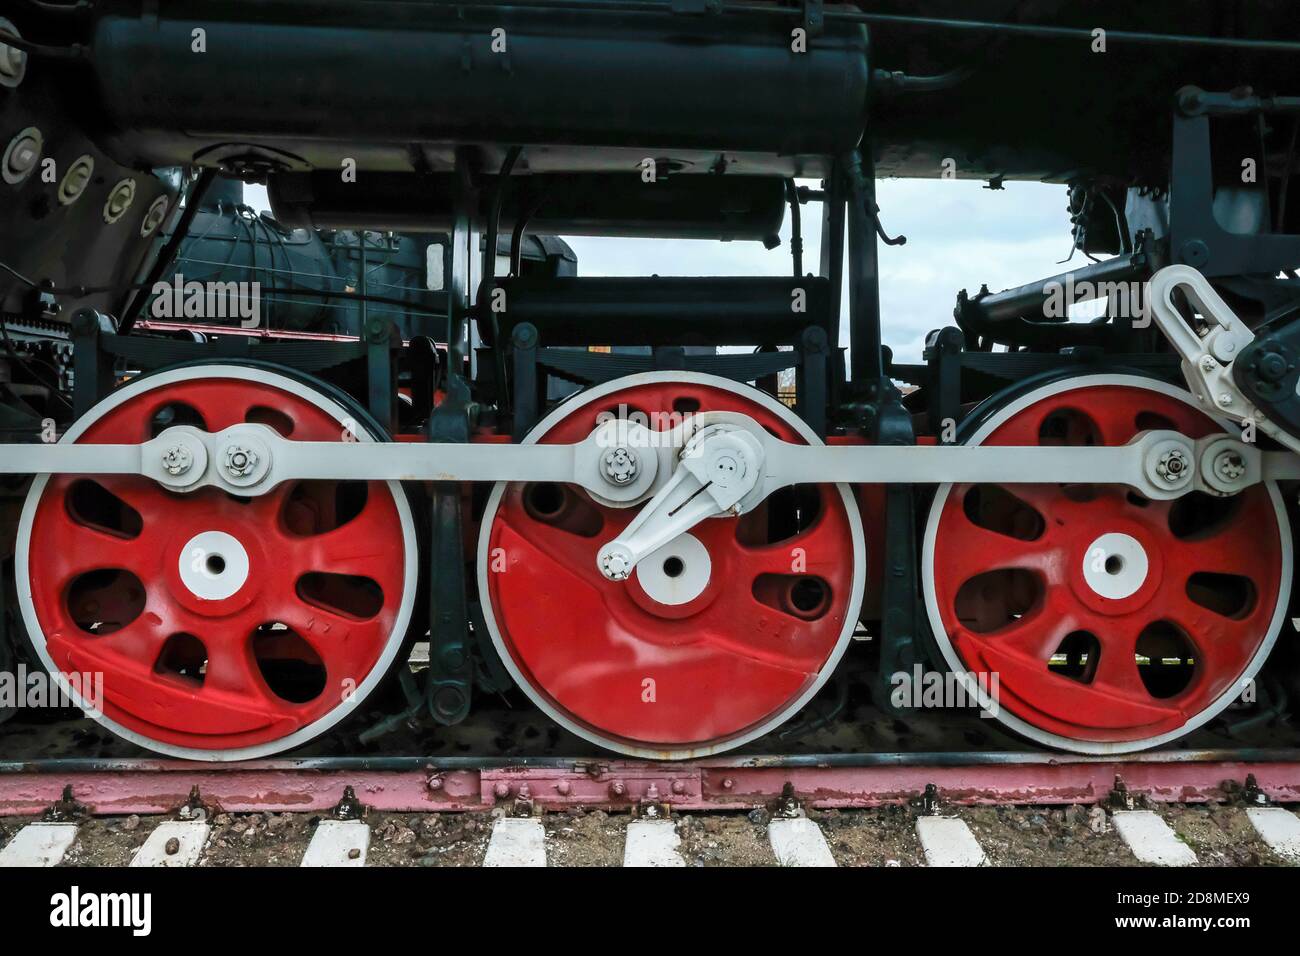 Old Russian train has been made on 1900. Old Russian locomotive. Steam locomotive with red wheels. Retro locomotive on rails. Stock Photo